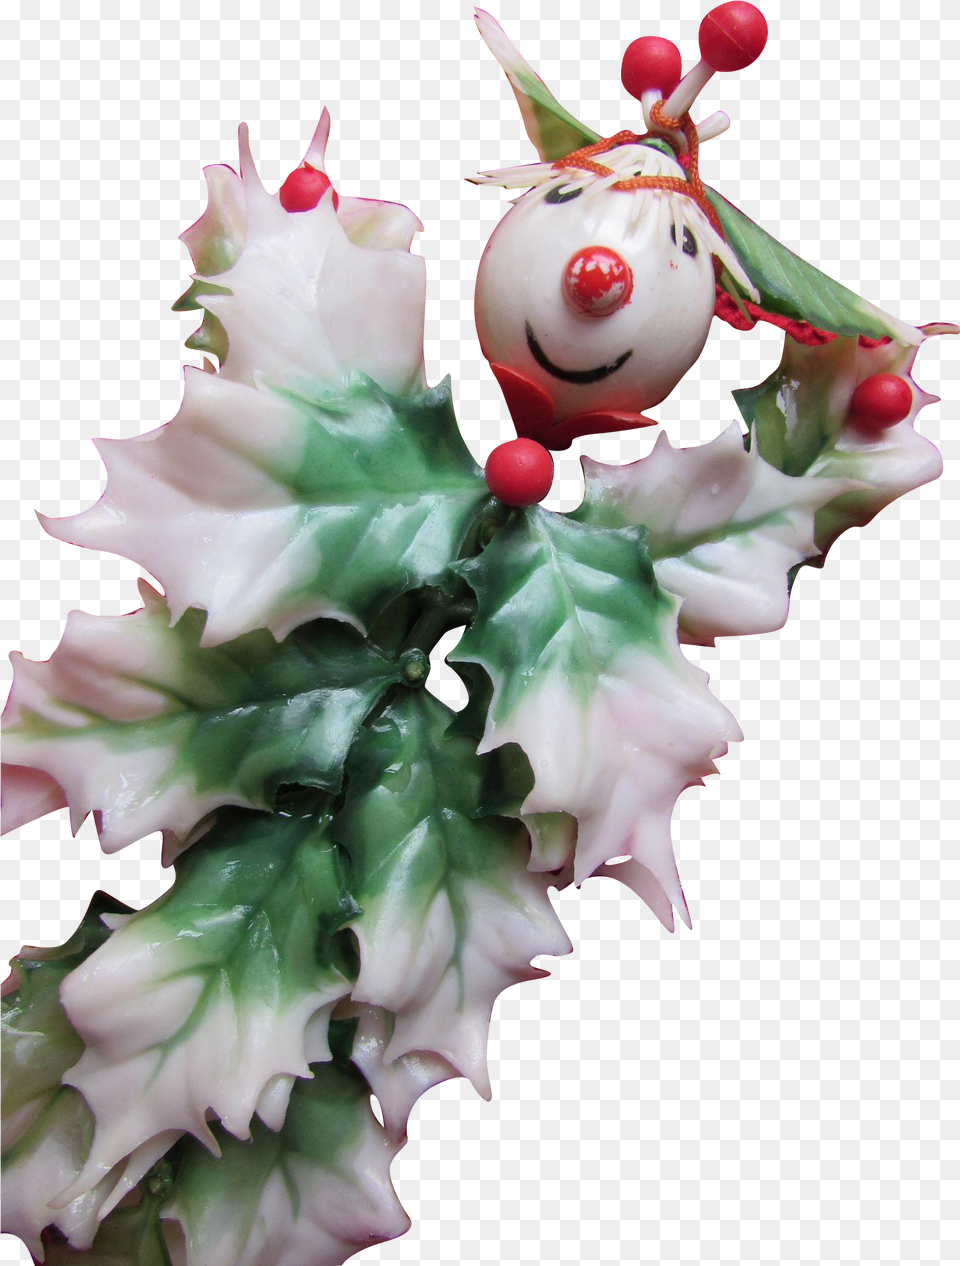 Artificial Flower, Leaf, Plant, Accessories, Figurine Png